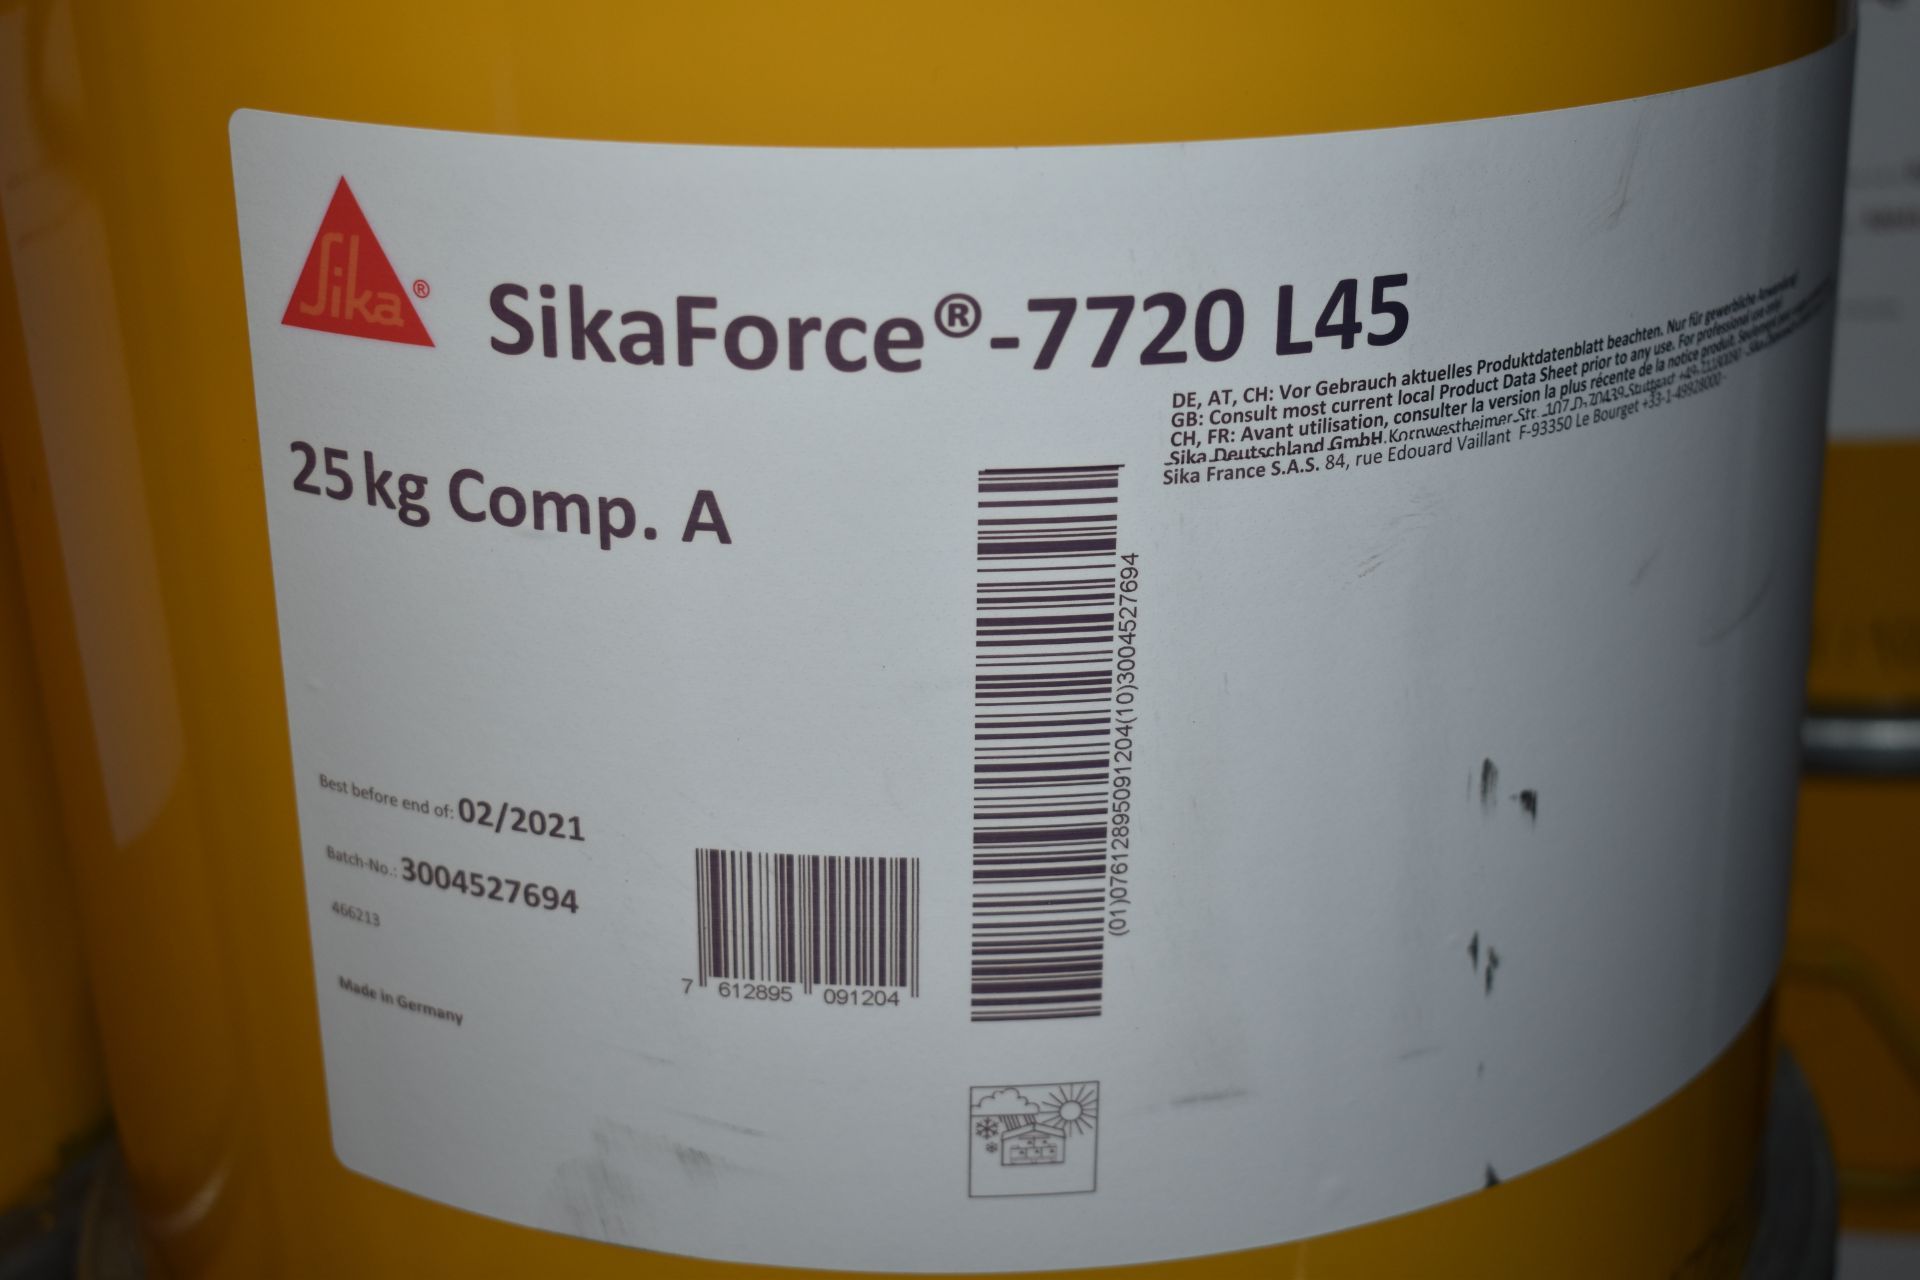 16 x SikaForce -7720 L45 None Sagging Assembly Adhesive 25kg Barrels- New Sealed Stock - CL622 - - Image 3 of 3